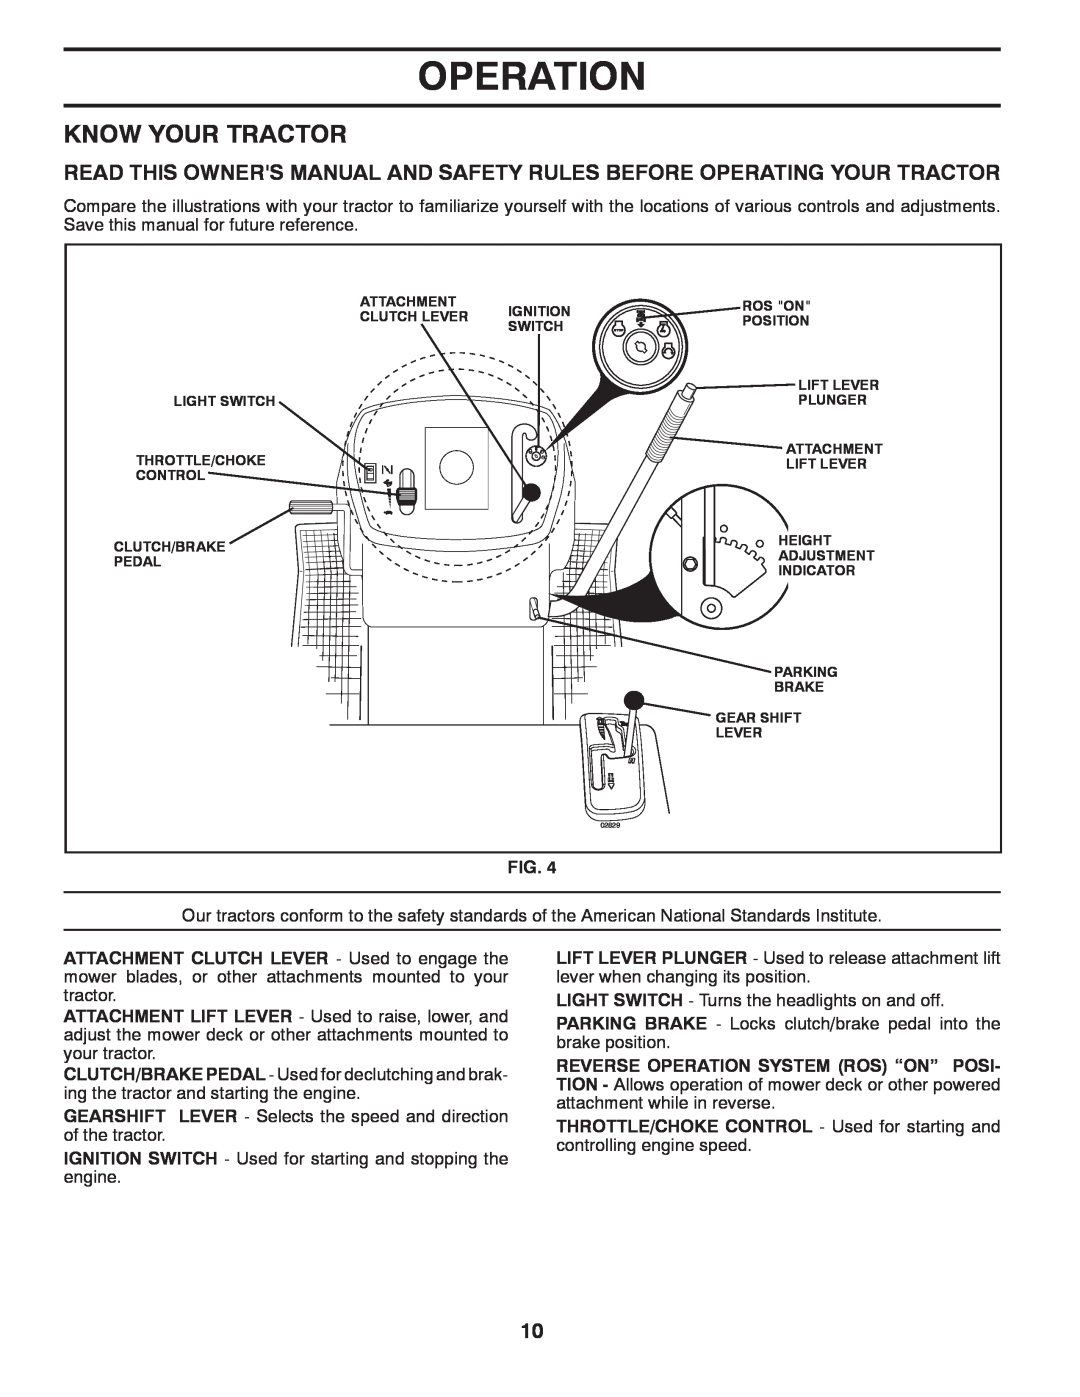 Poulan 425179 manual Know Your Tractor, Operation 